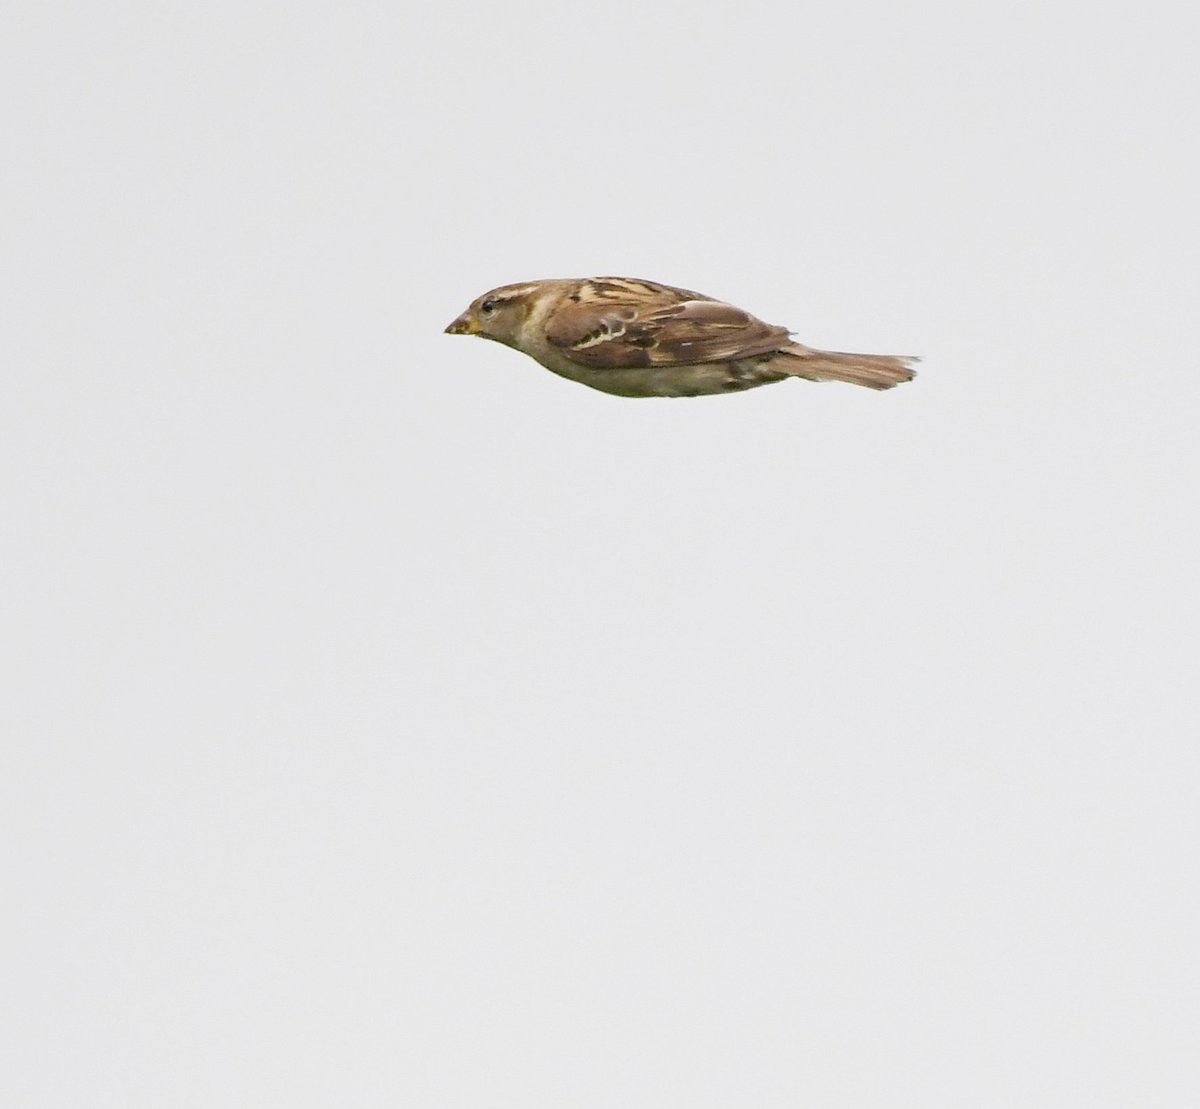 I also managed to dodge this House Sparrow launched at me!Good job I have quick reflections, it could have been deadly! 